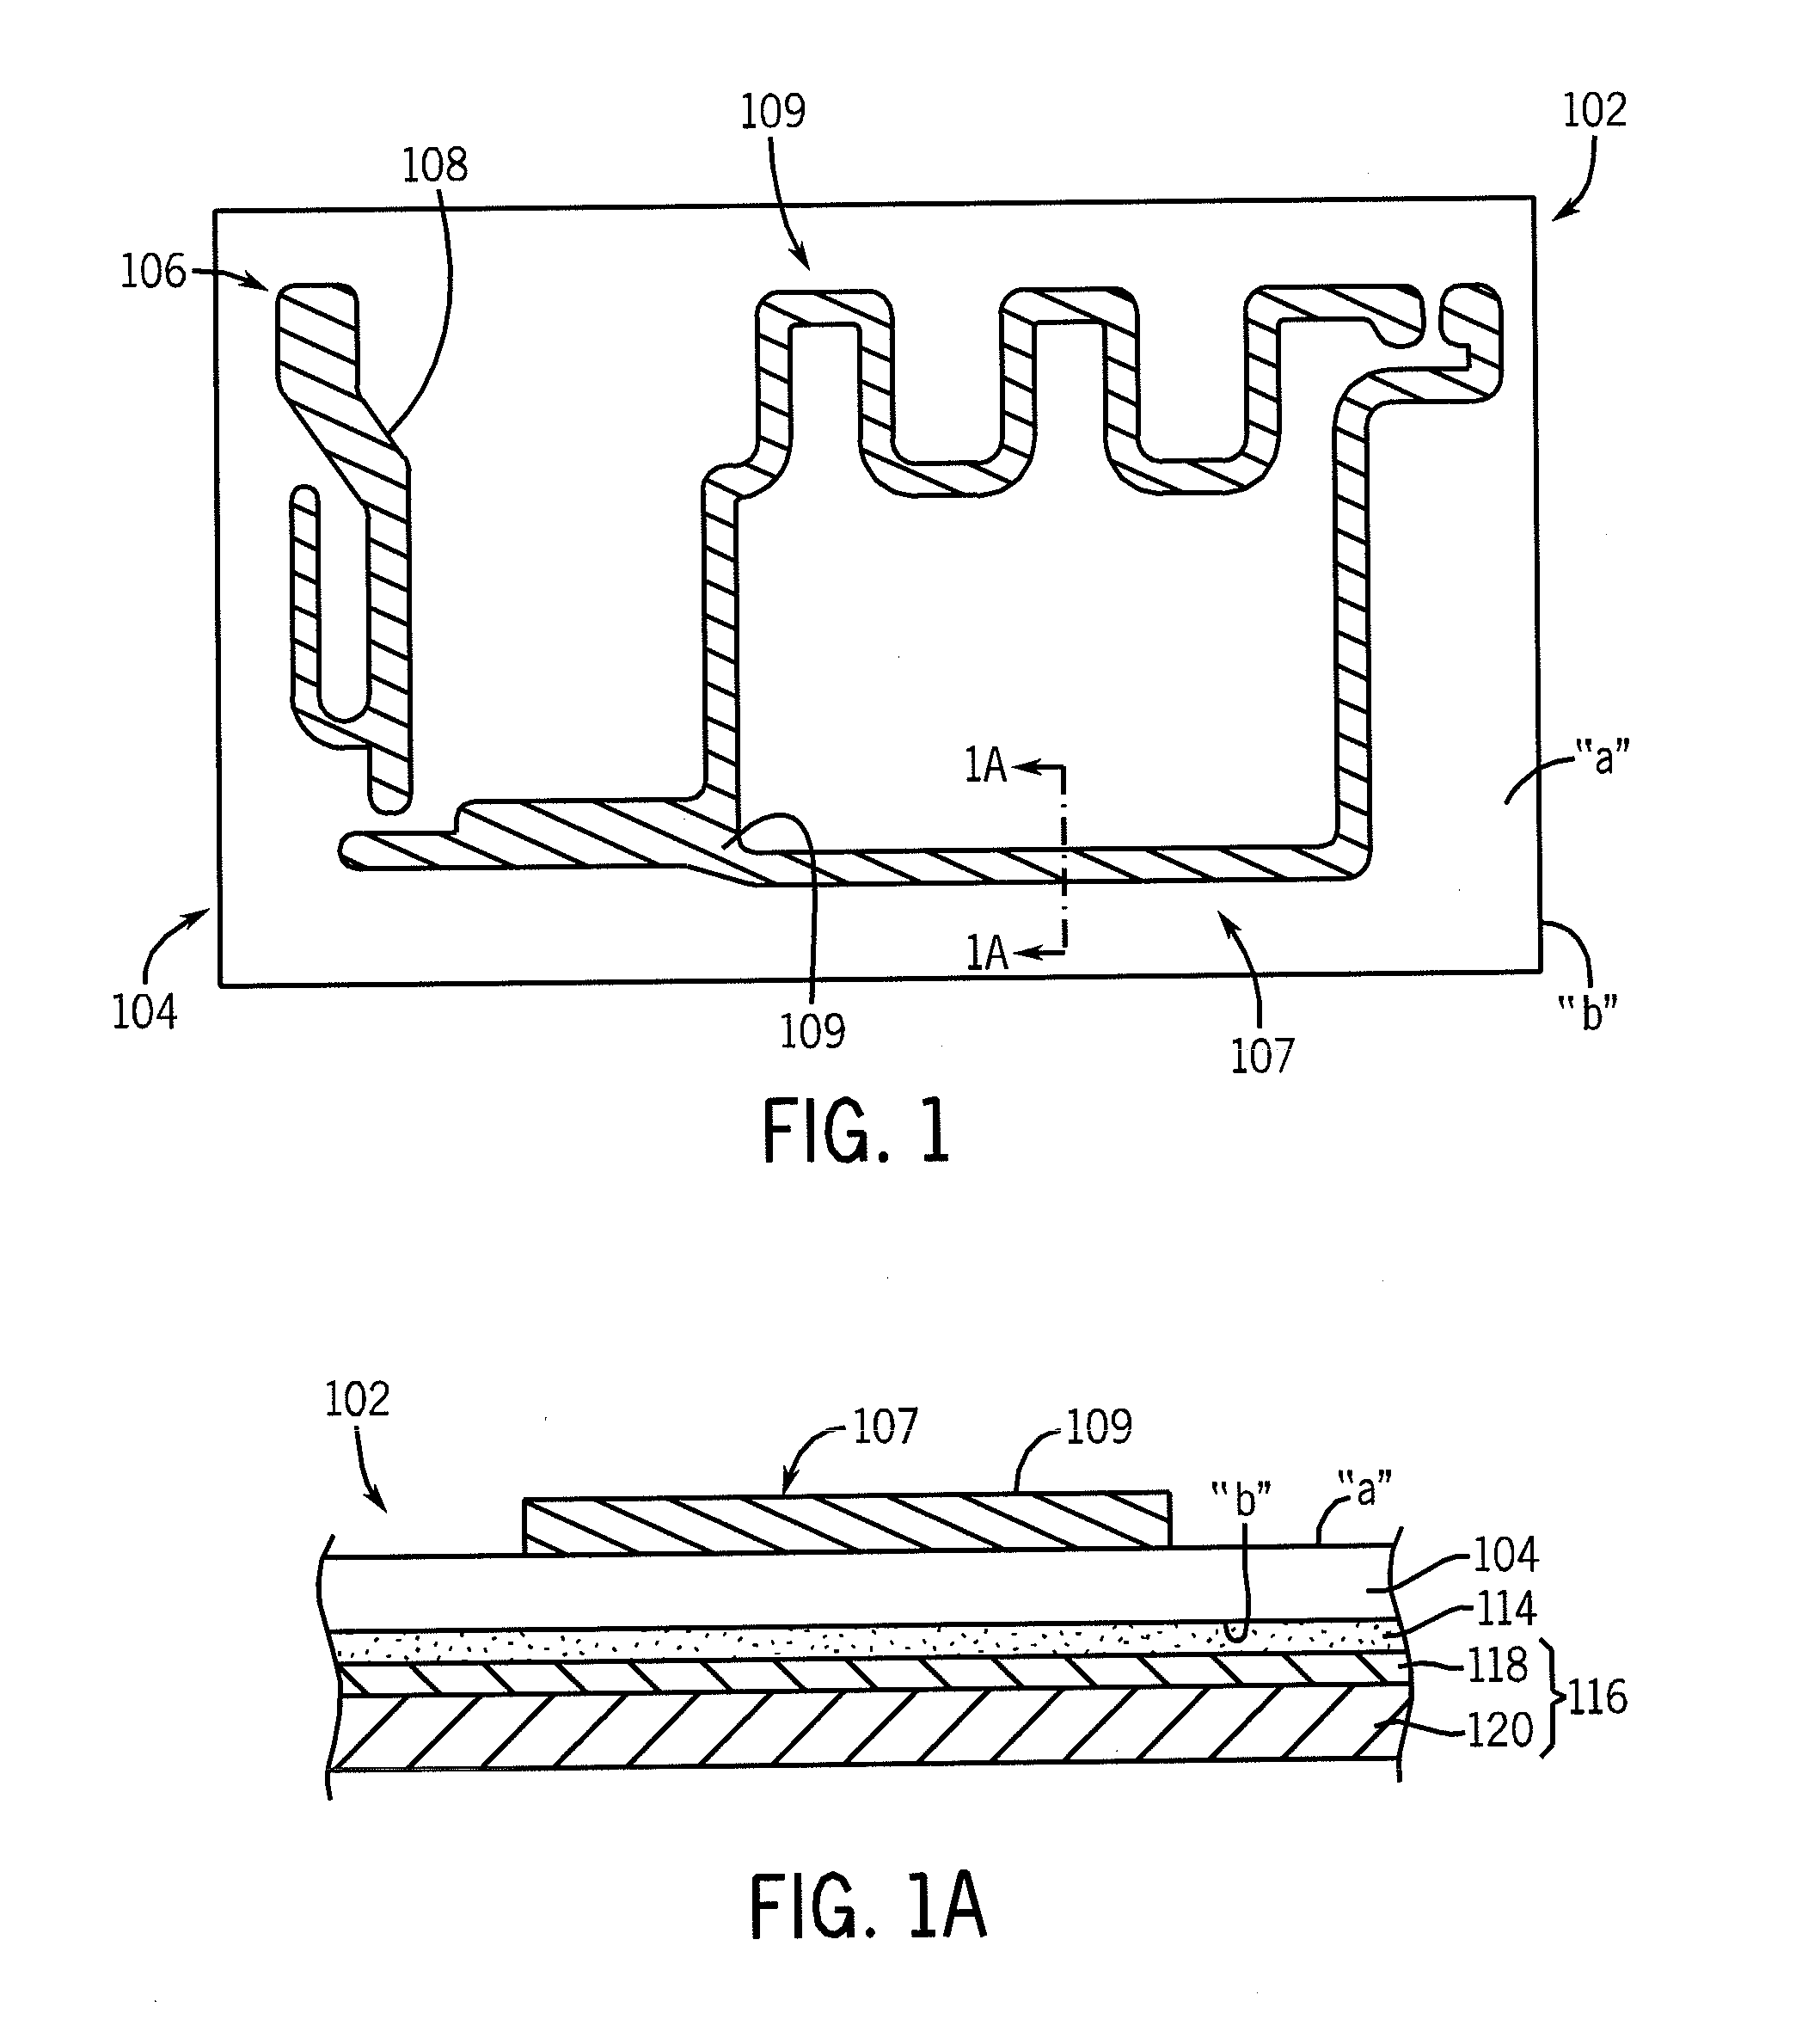 Method of Manufacturing and Operating an Antenna Arrangement for a Communication Device